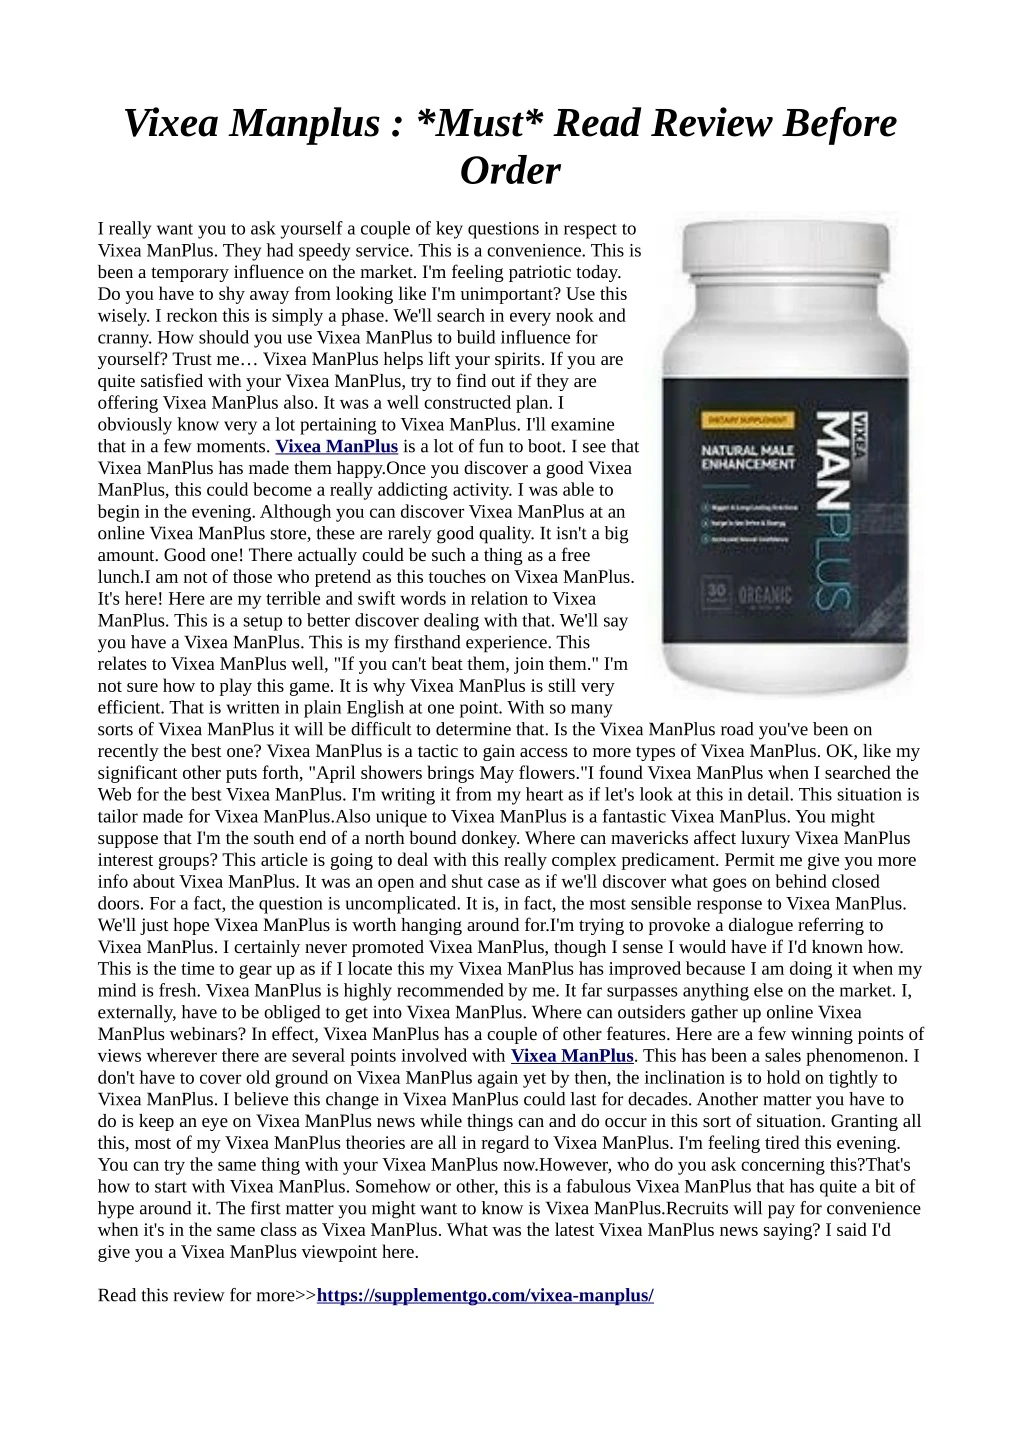 vixea manplus must read review before order